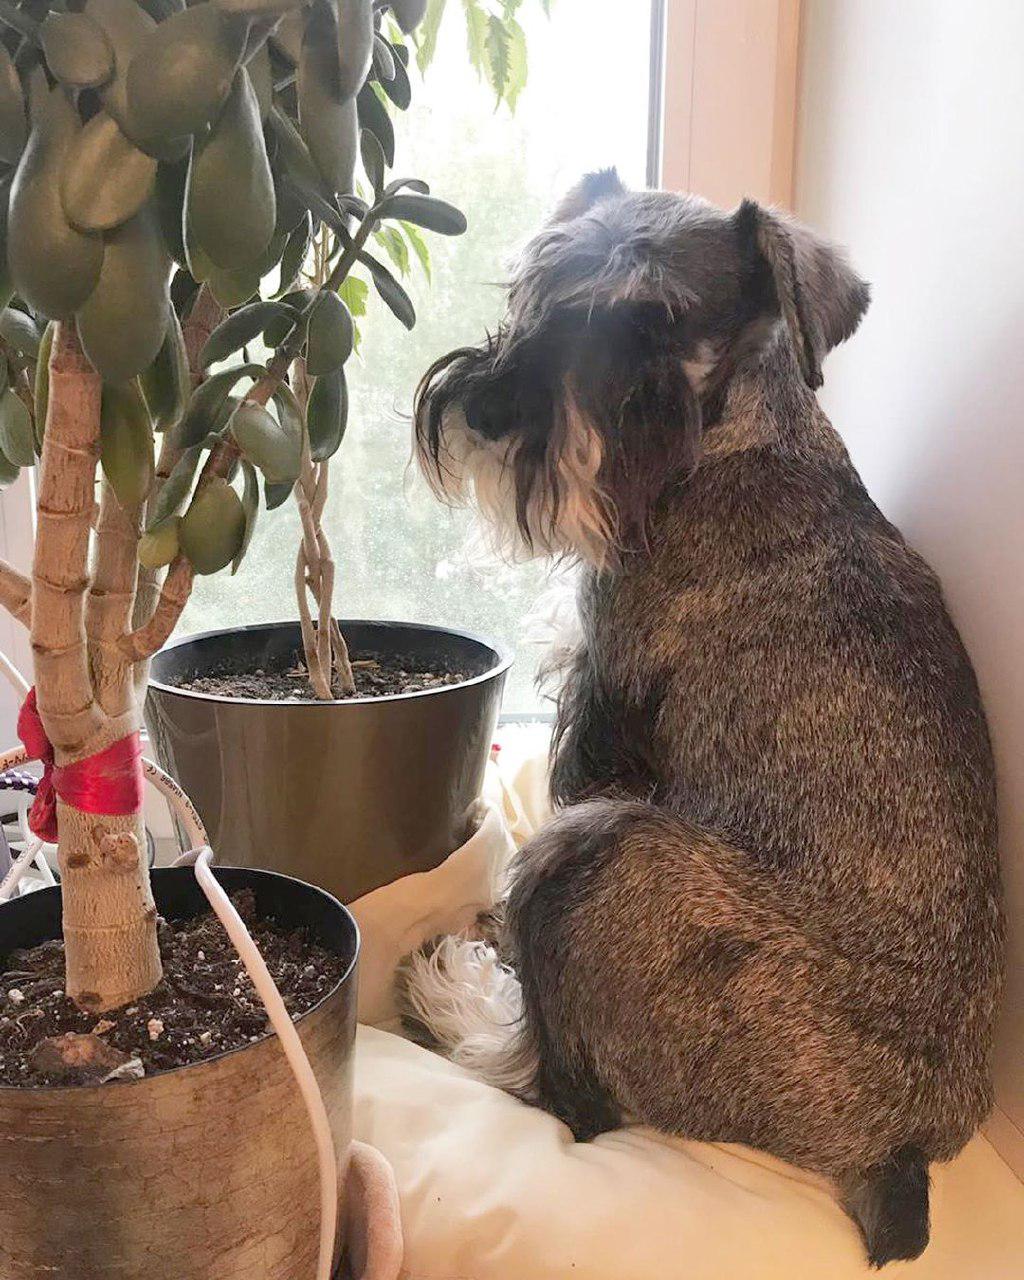 Schnauzer sitting by the window next to the potted plants